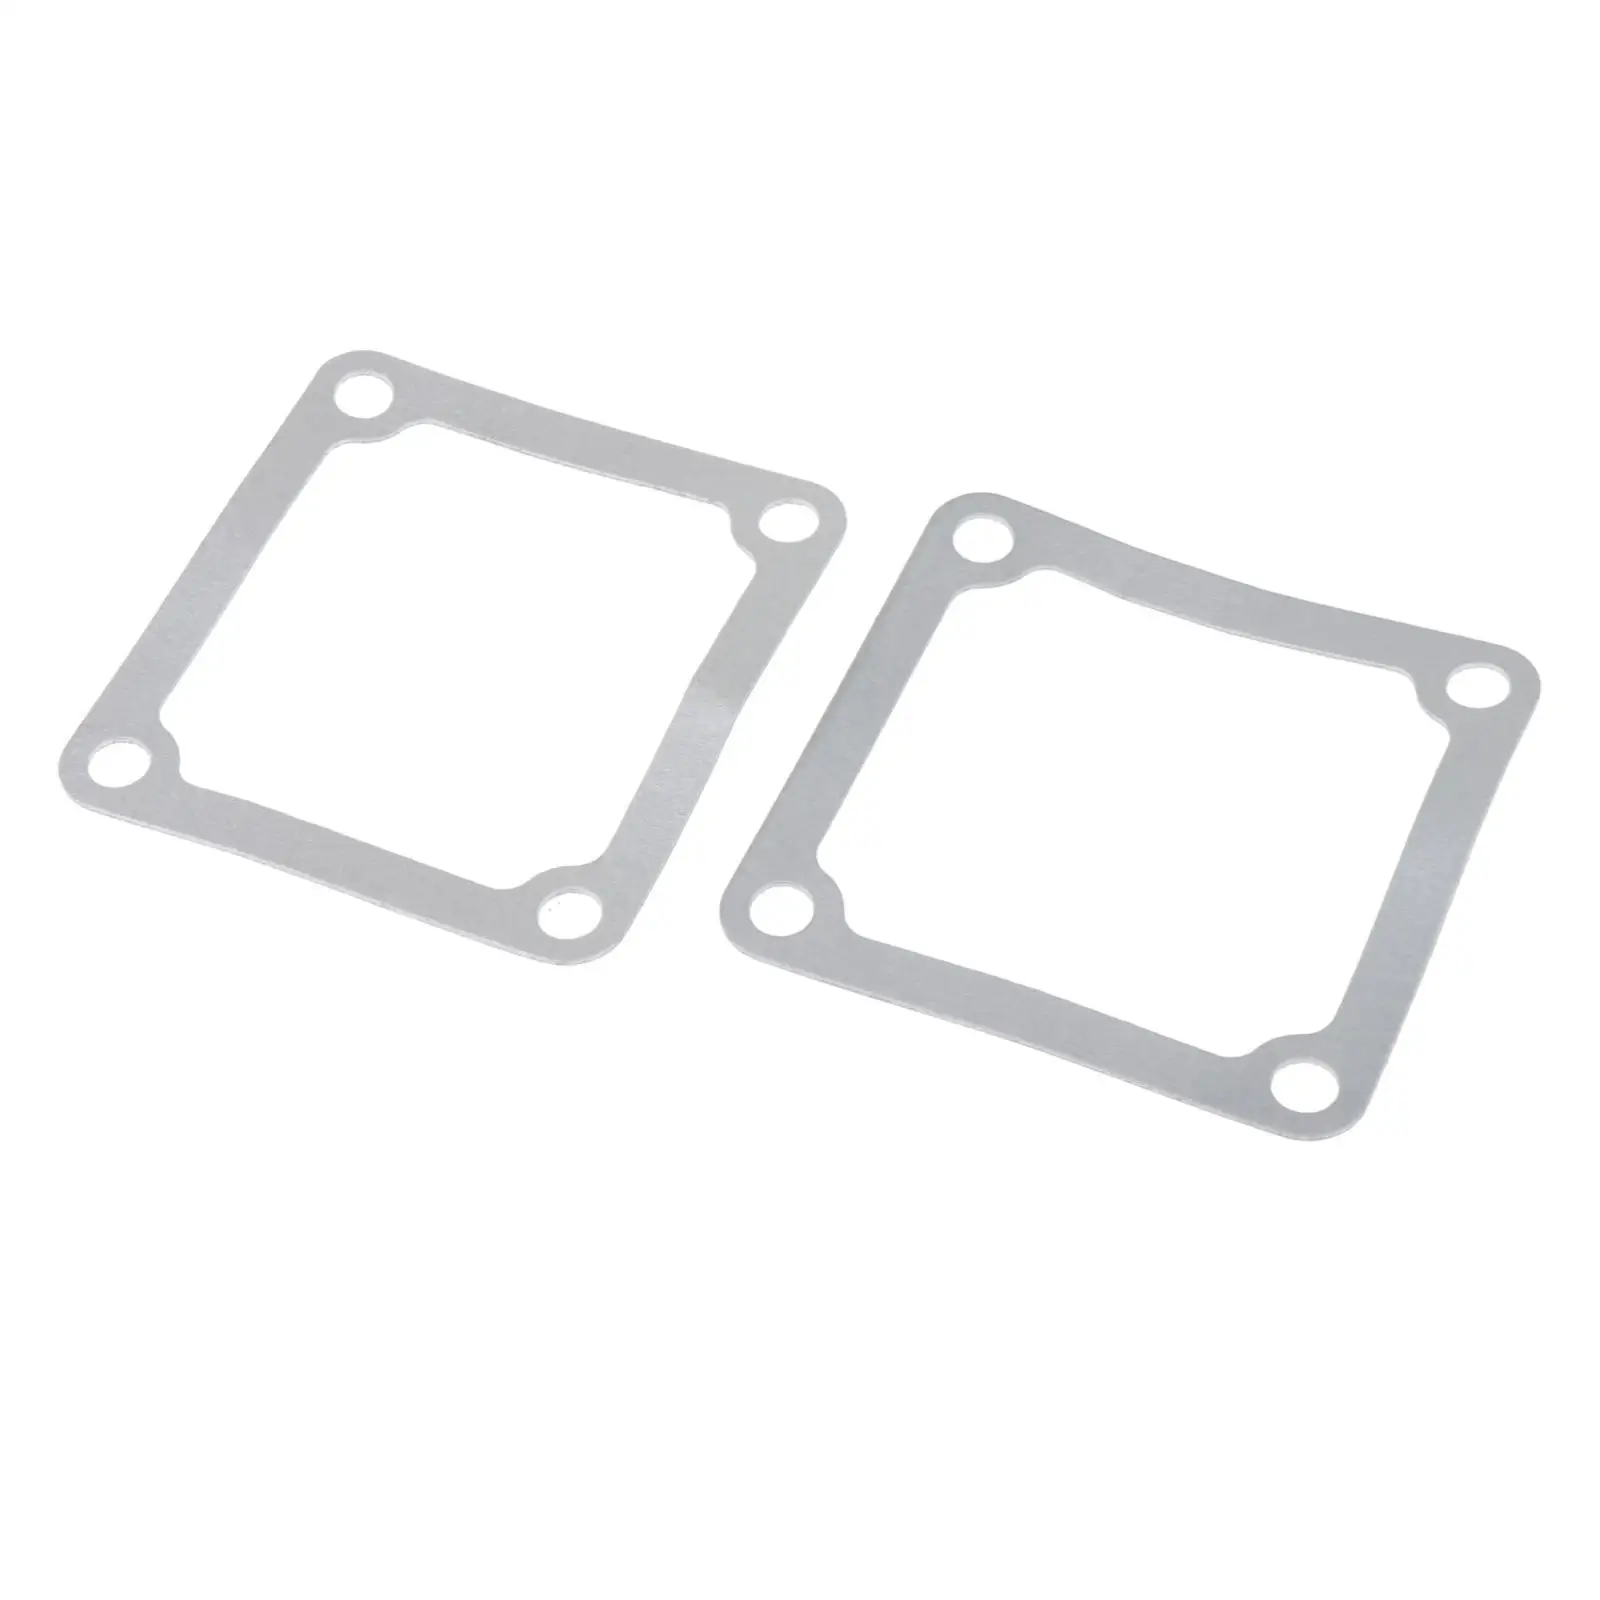 2x Intake Heater Grid Gaskets 93x98mm 12V, 24V Leakproof Spare Replacement